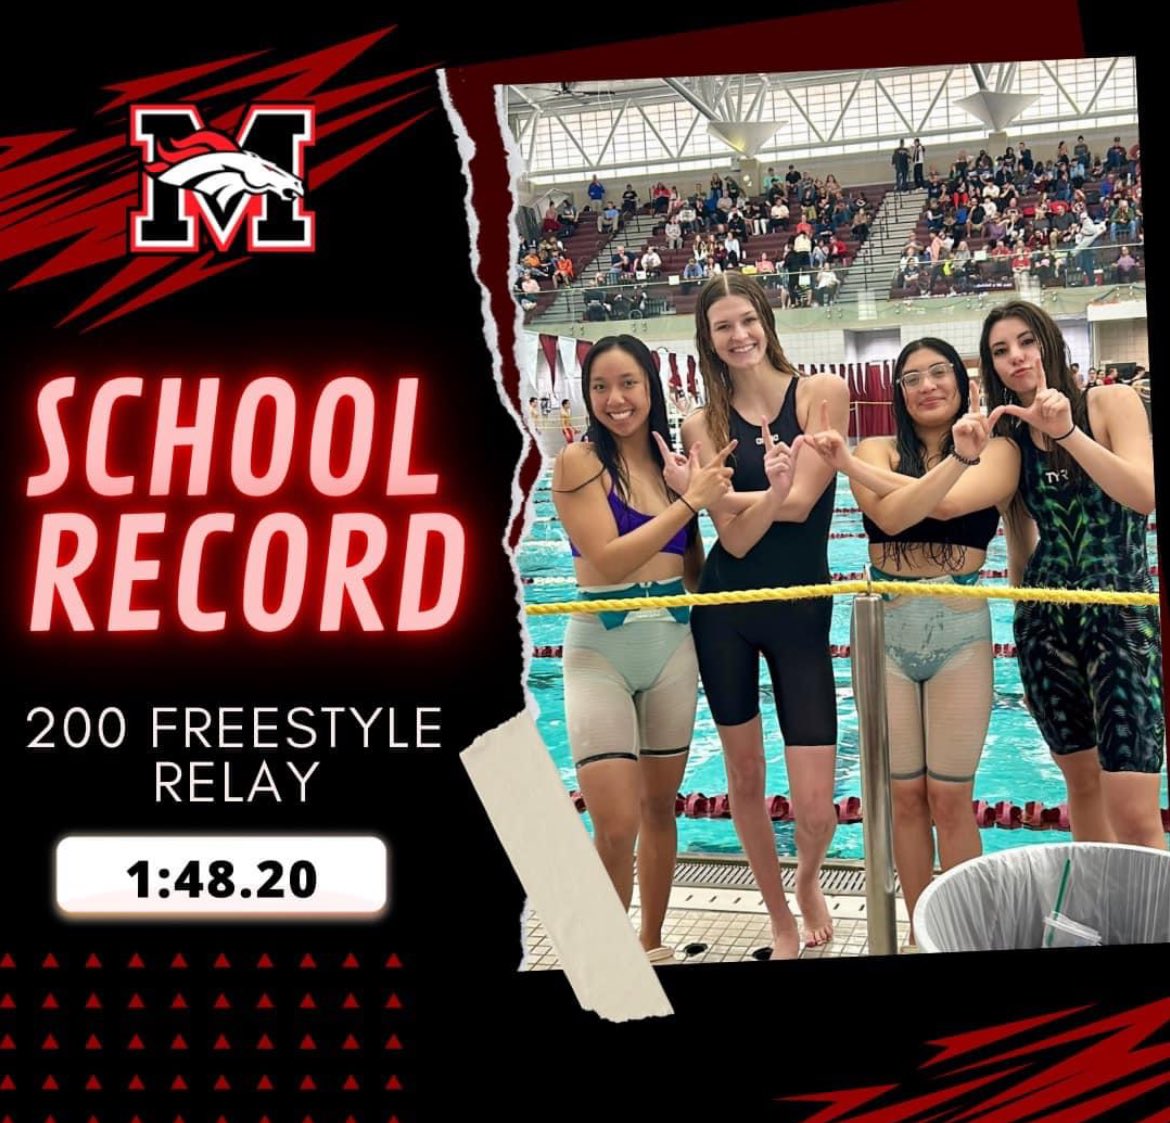 Girls with some school records at State!! @MustangReview @MHSBroncoSports @MHS_Broncos @MustangSchools